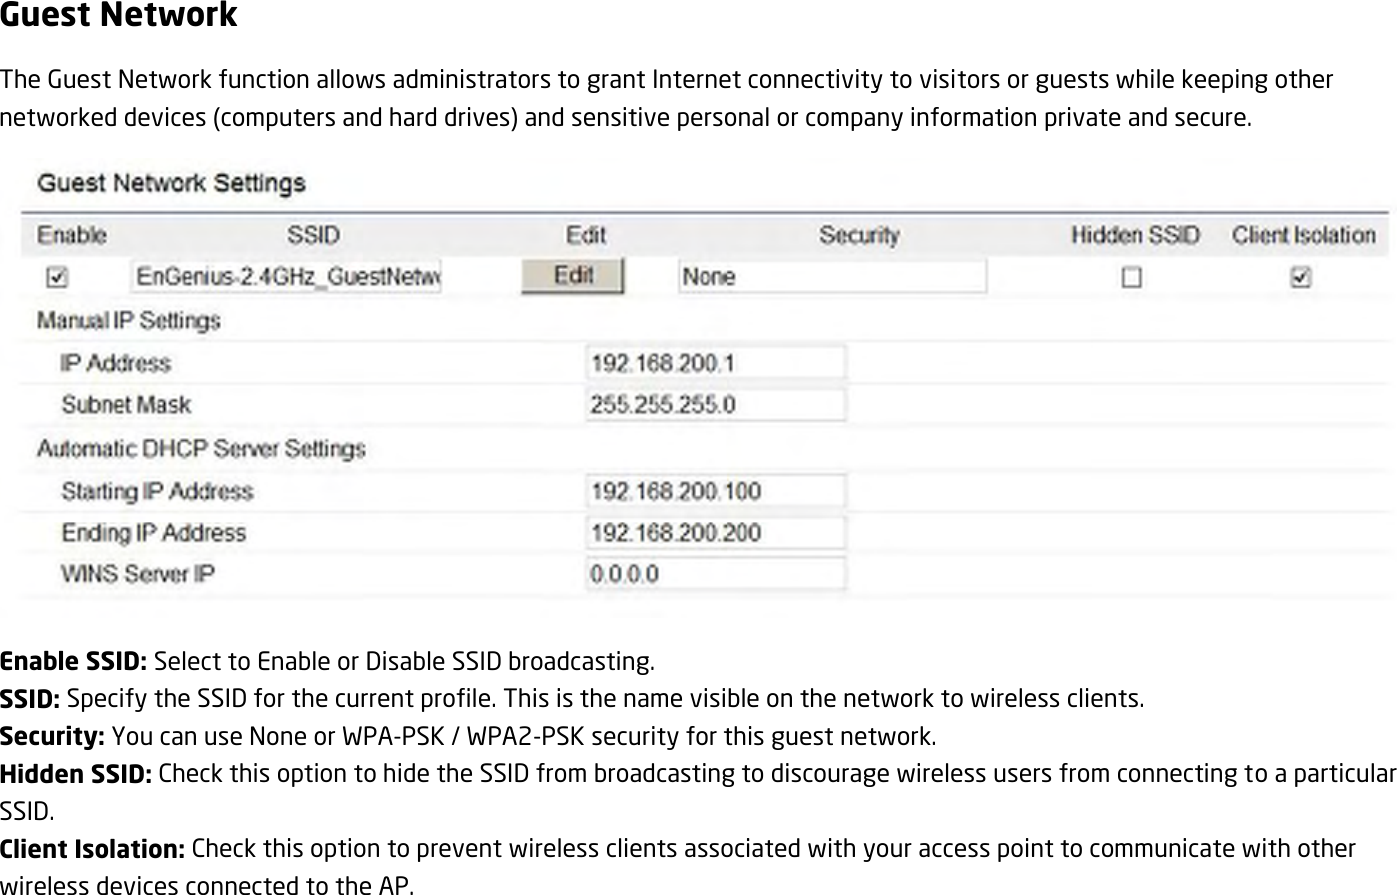 Guest Network The Guest Network function allows administrators to grant Internet connectivity to visitors or guests while keeping other networked devices (computers and hard drives) and sensitive personal or company information private and secure.  Enable SSID: Select to Enable or Disable SSID broadcasting. SSID: Specify the SSID for the current profile. This is the name visible on the network to wireless clients. Security: You can use None or WPA-PSK / WPA2-PSK security for this guest network. Hidden SSID: Check this option to hide the SSID from broadcasting to discourage wireless users from connecting to a particular SSID.   Client Isolation: Check this option to prevent wireless clients associated with your access point to communicate with other wireless devices connected to the AP. 